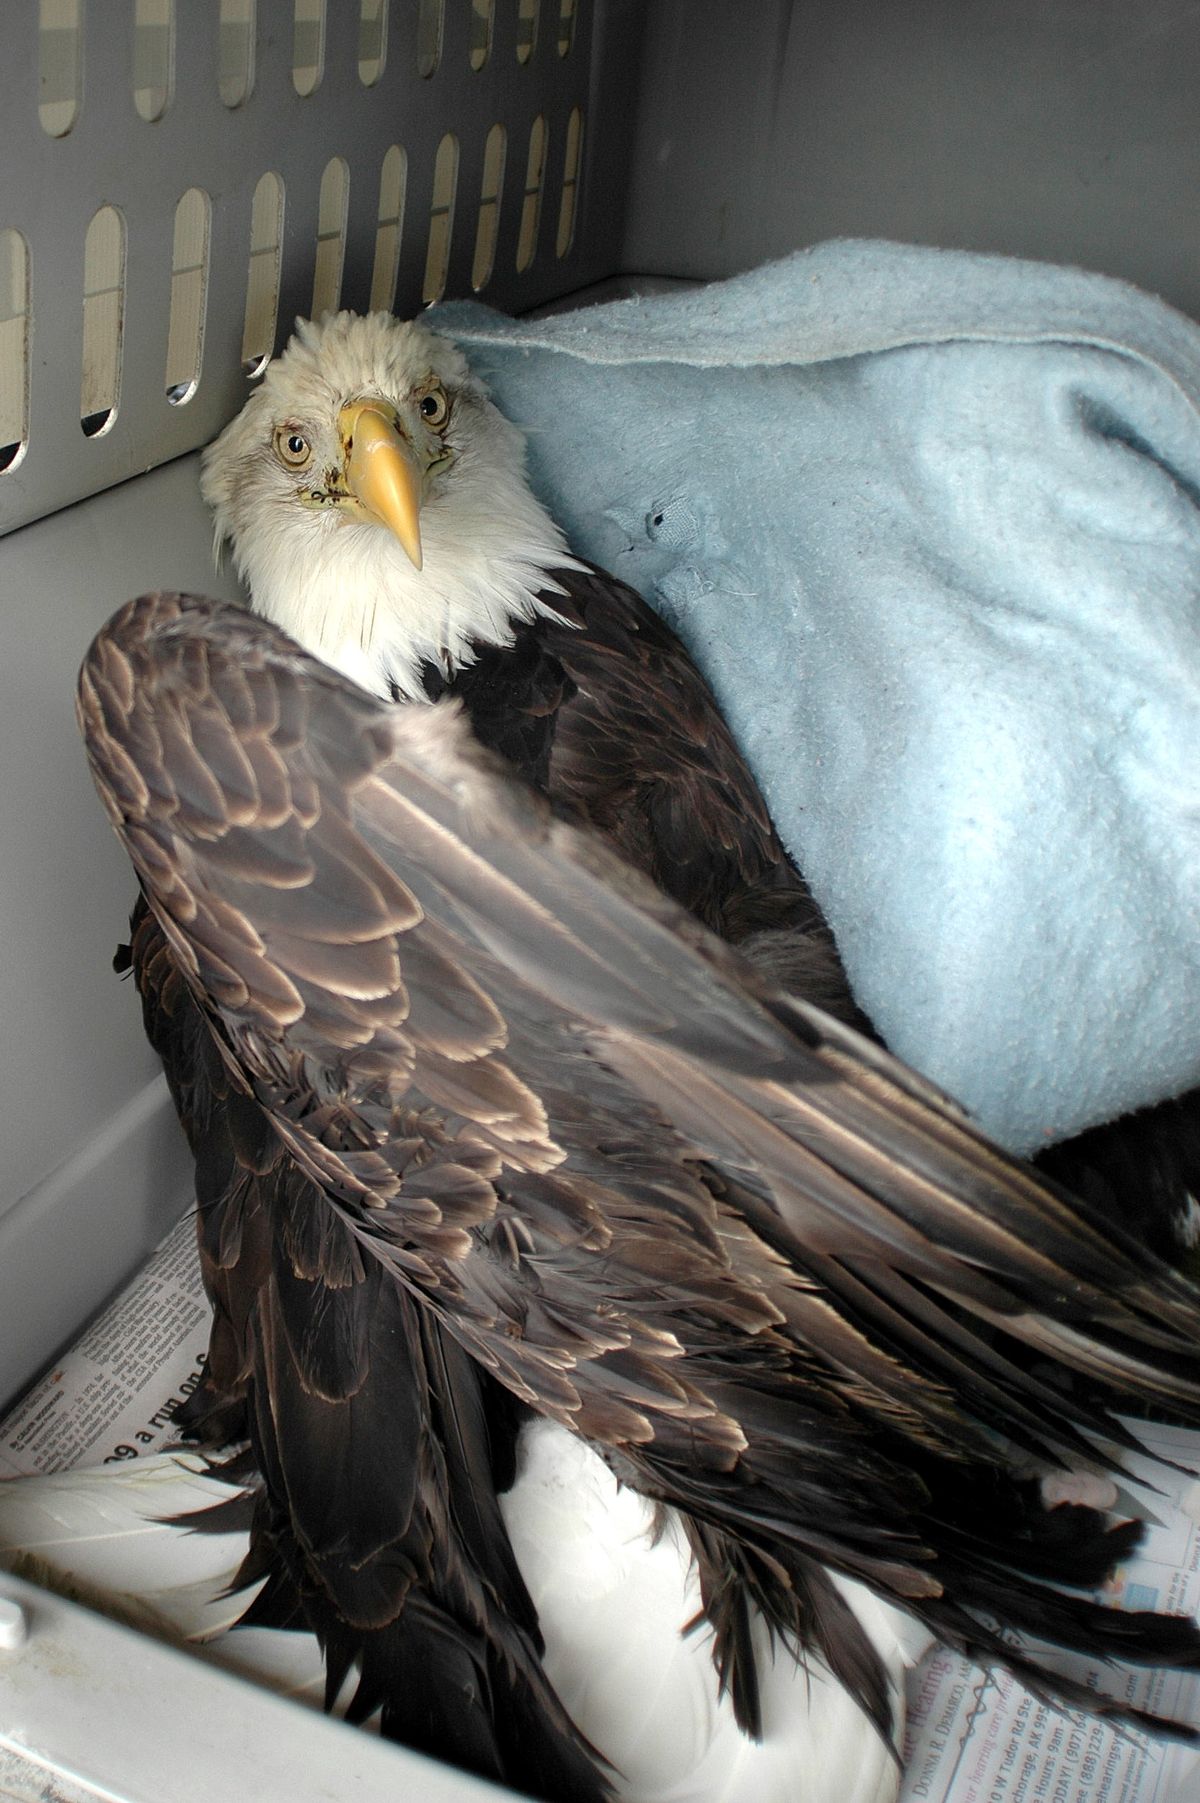 Left: The female eagle who fell into the snow near Valdez, Alaska, is being treated for multiple injuries. The male died.